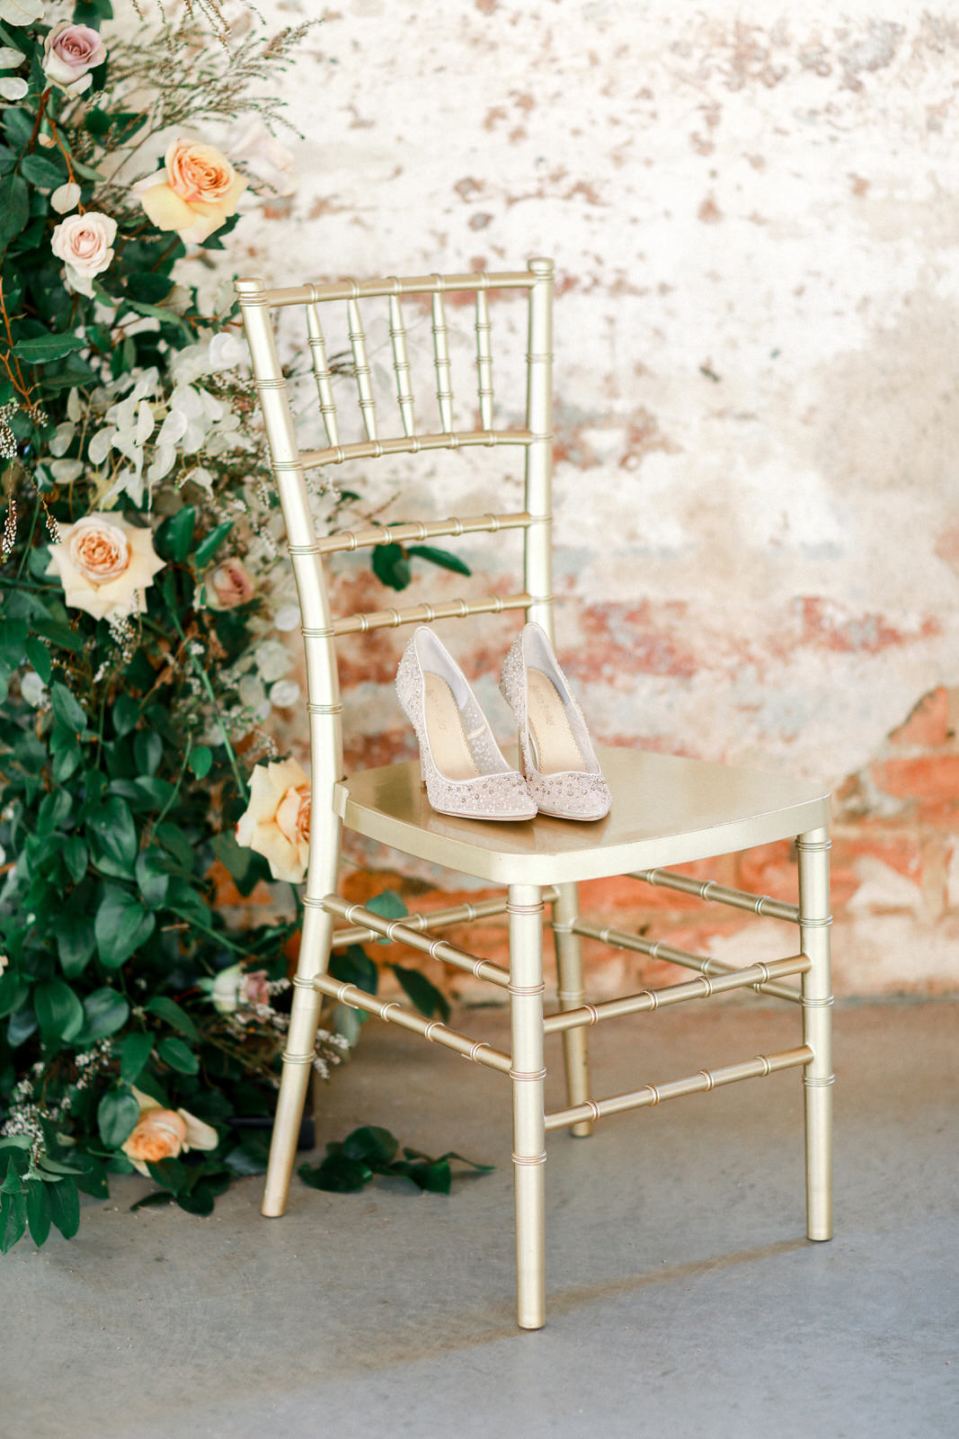 Providence Cotton Mill - Styled Shoot